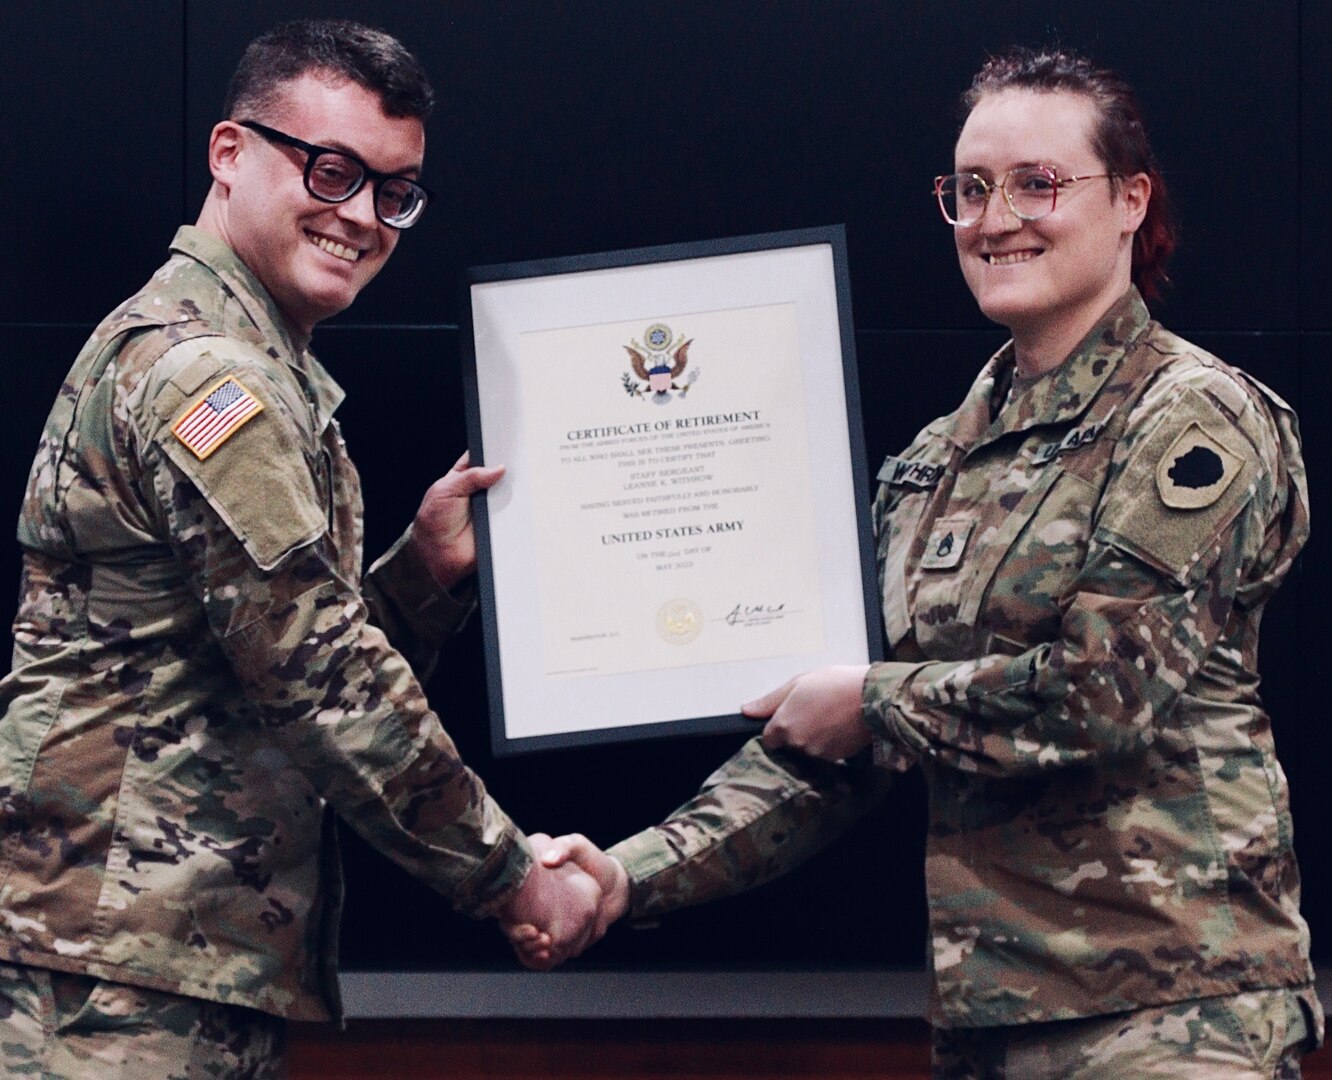 Army Reserve 1st Lt. Colin Withrow of the 484th Forward Engineer Support Team presents his sister, Illinois Army National Guard Staff Sgt. LeAnne Withrow, with a Certificate of Retirement during Staff Sgt. LeAnne Withrow's retirement ceremony.